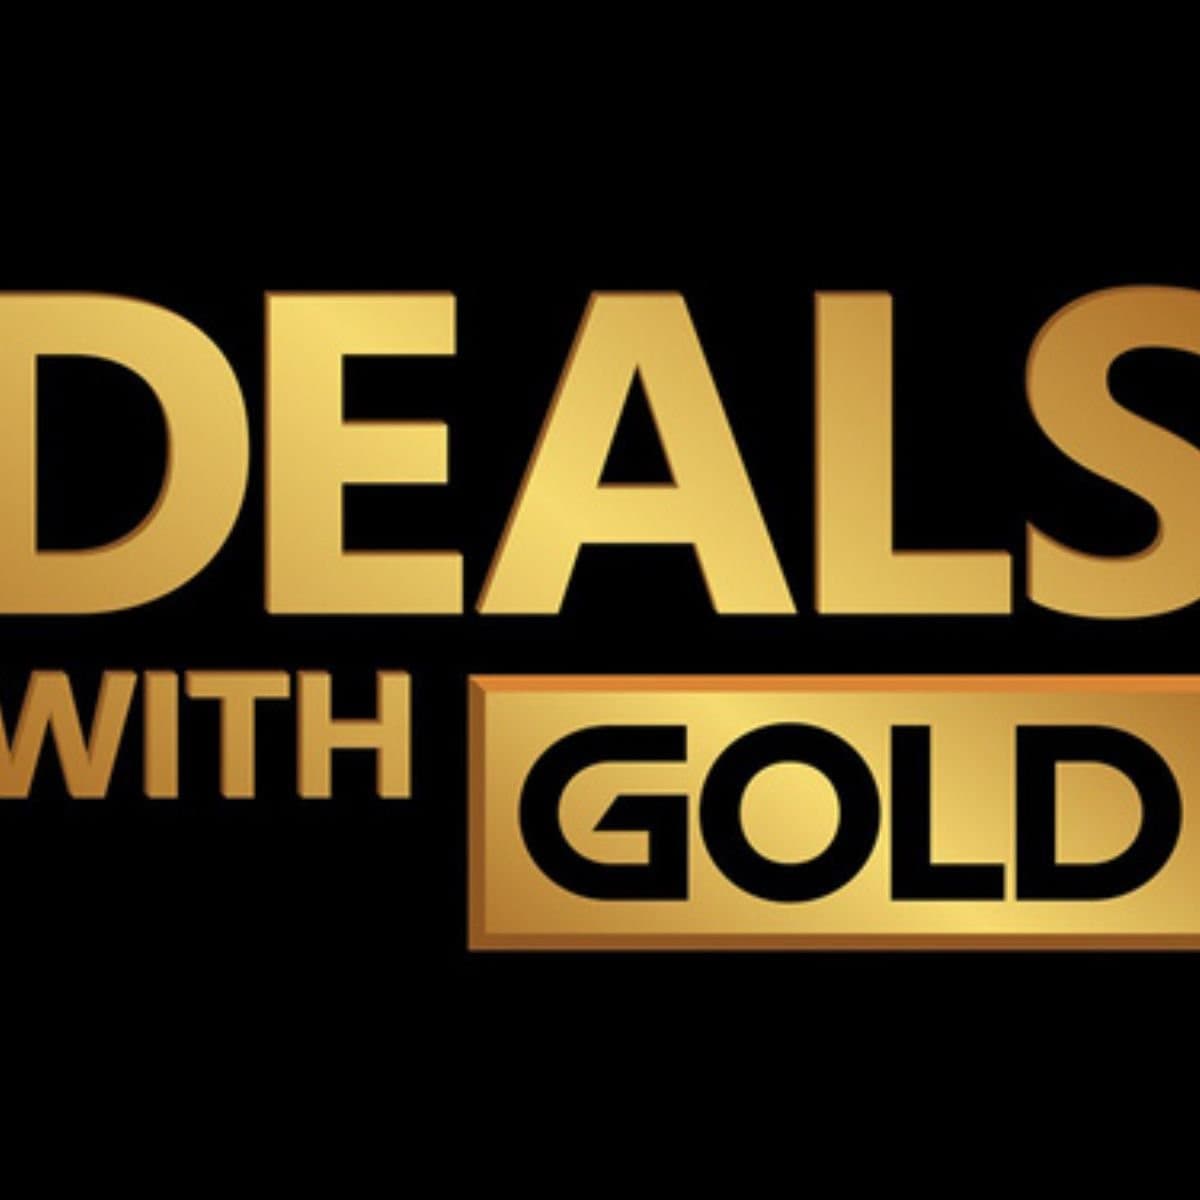 Deals with Gold semaine 52